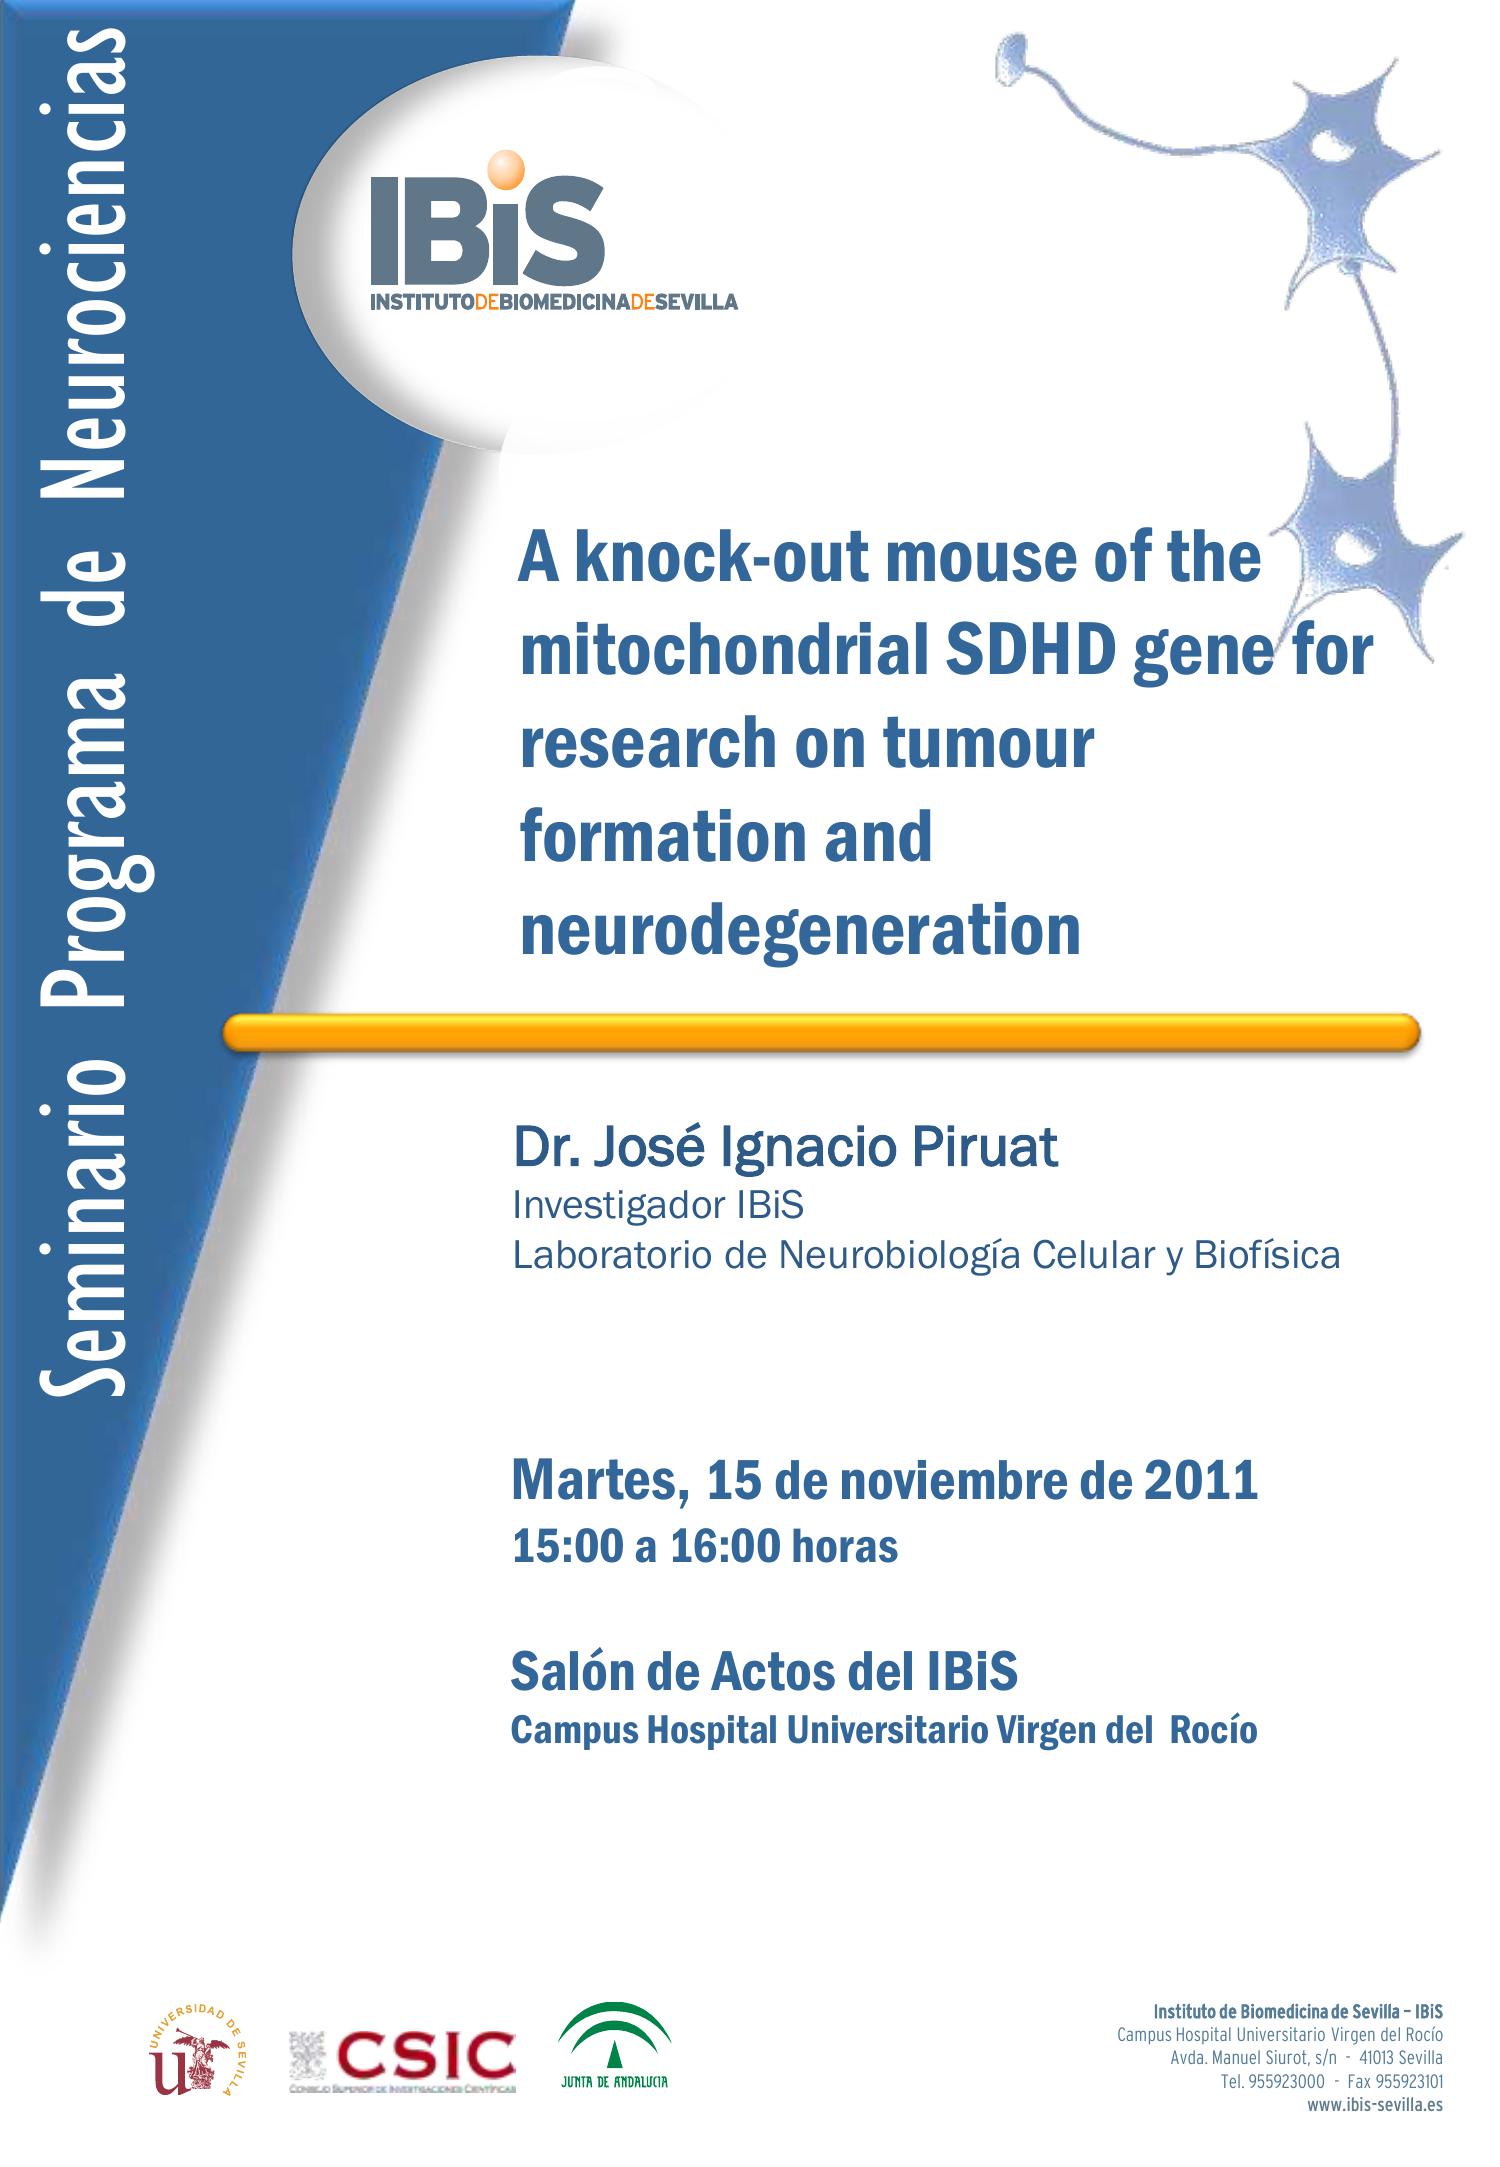 Poster: A knock-out mouse of the mitochondrial SDHD gene for research on tumour formation and neurodegeneration.